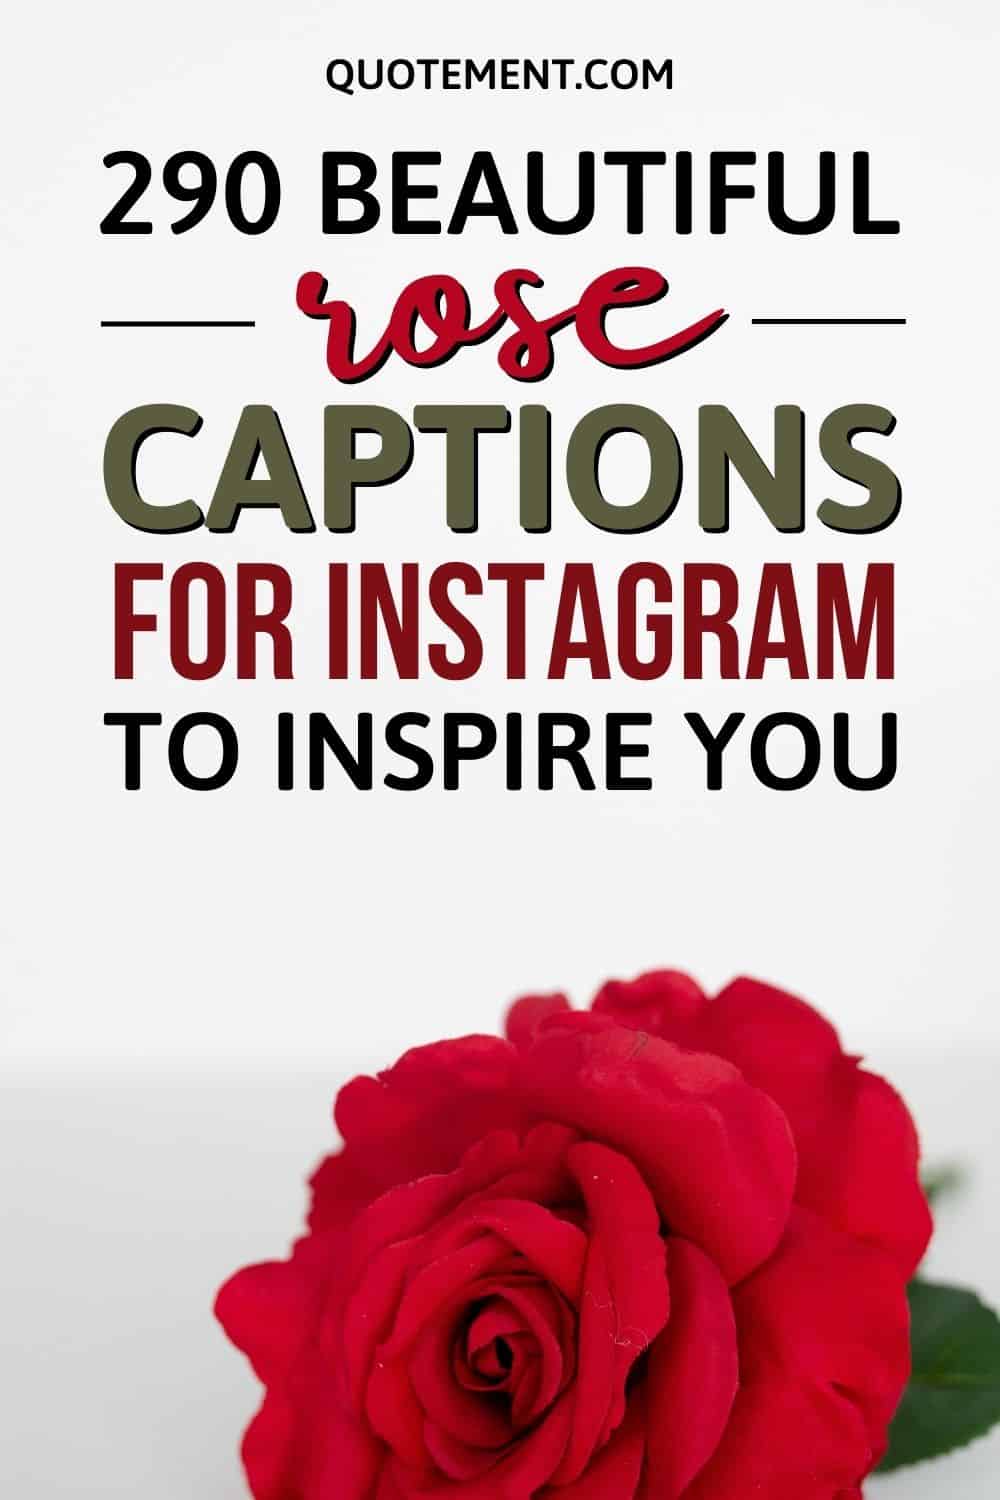 290 Beautiful Rose Captions For Instagram To Inspire You